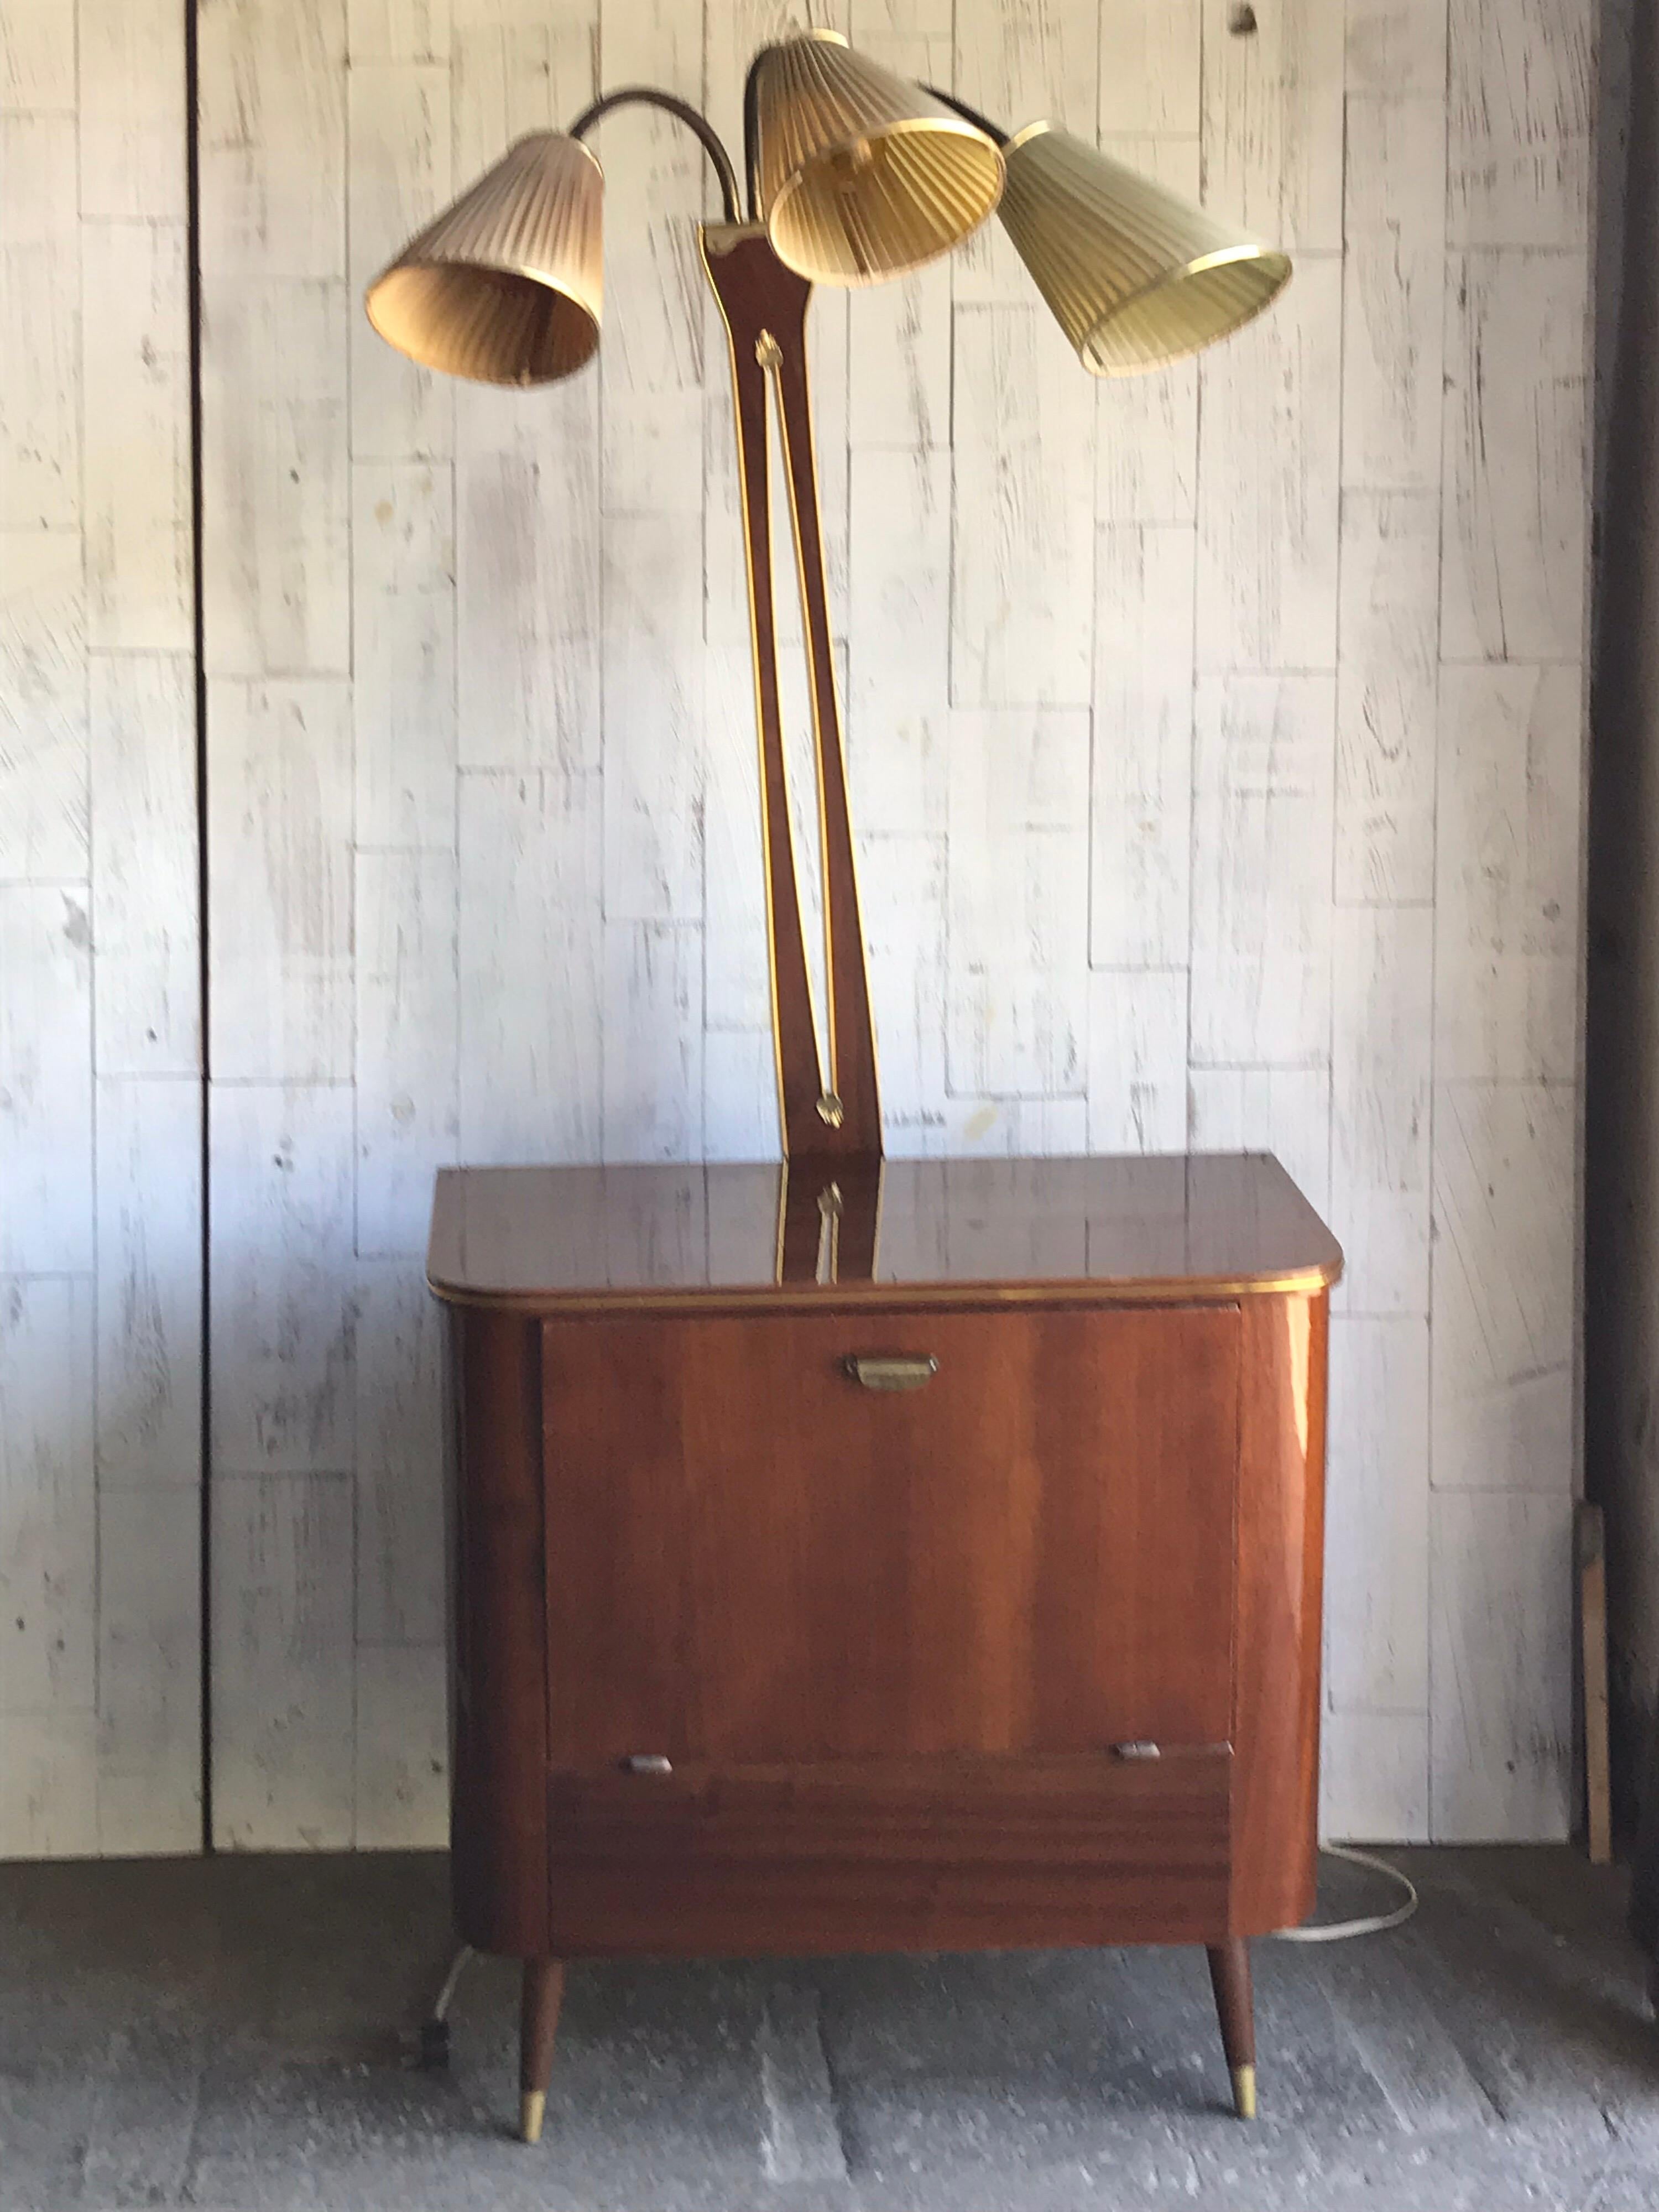 Art Deco 1950s Walnut Drinks Bar Cocktail Liquor Cabinet with Lamp Stand For Sale 8